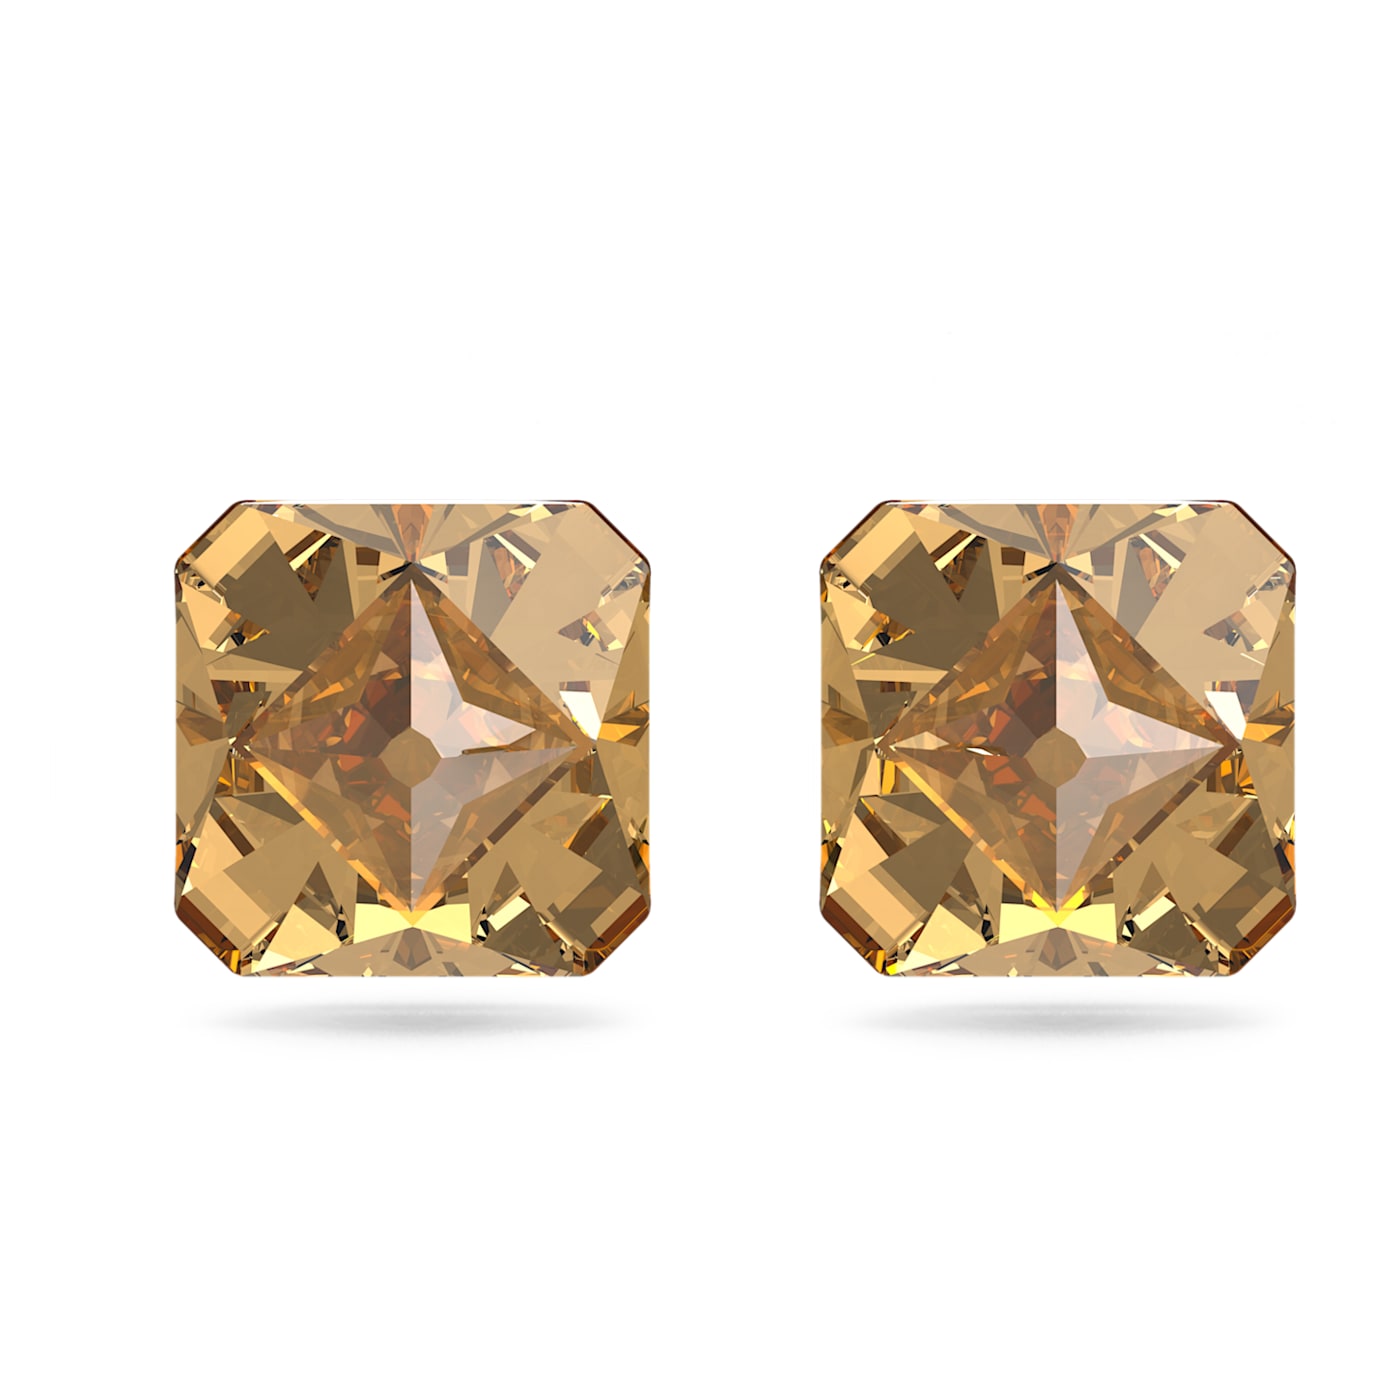 ORTYX STUD EARRINGS, PYRAMIND CUT CRYSTALS, YELLOW, GOLD-TONE PLATED